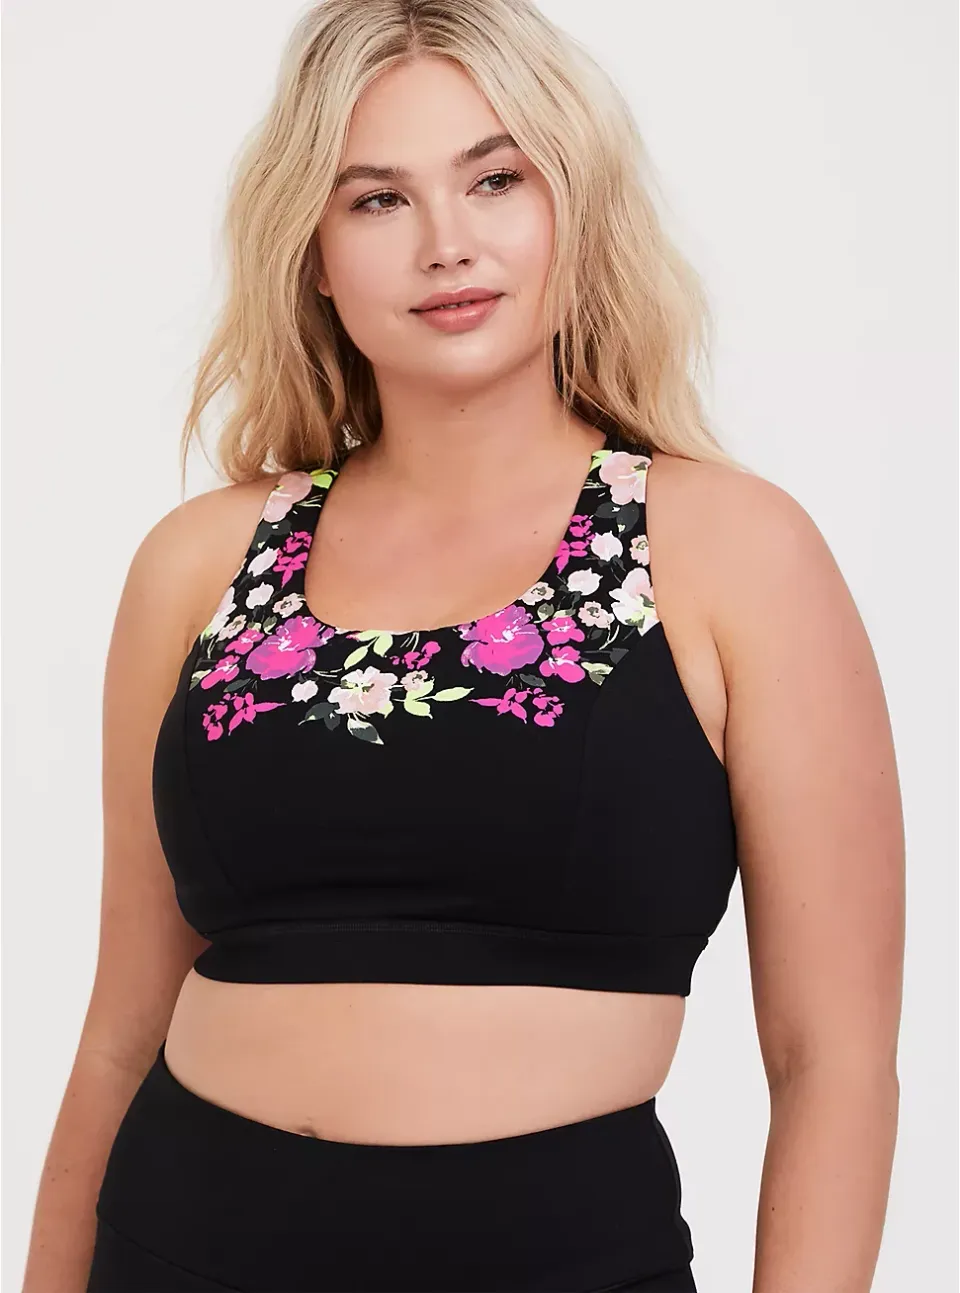 The Best Plus Size Sports Bras Of 2020 | HuffPost Life